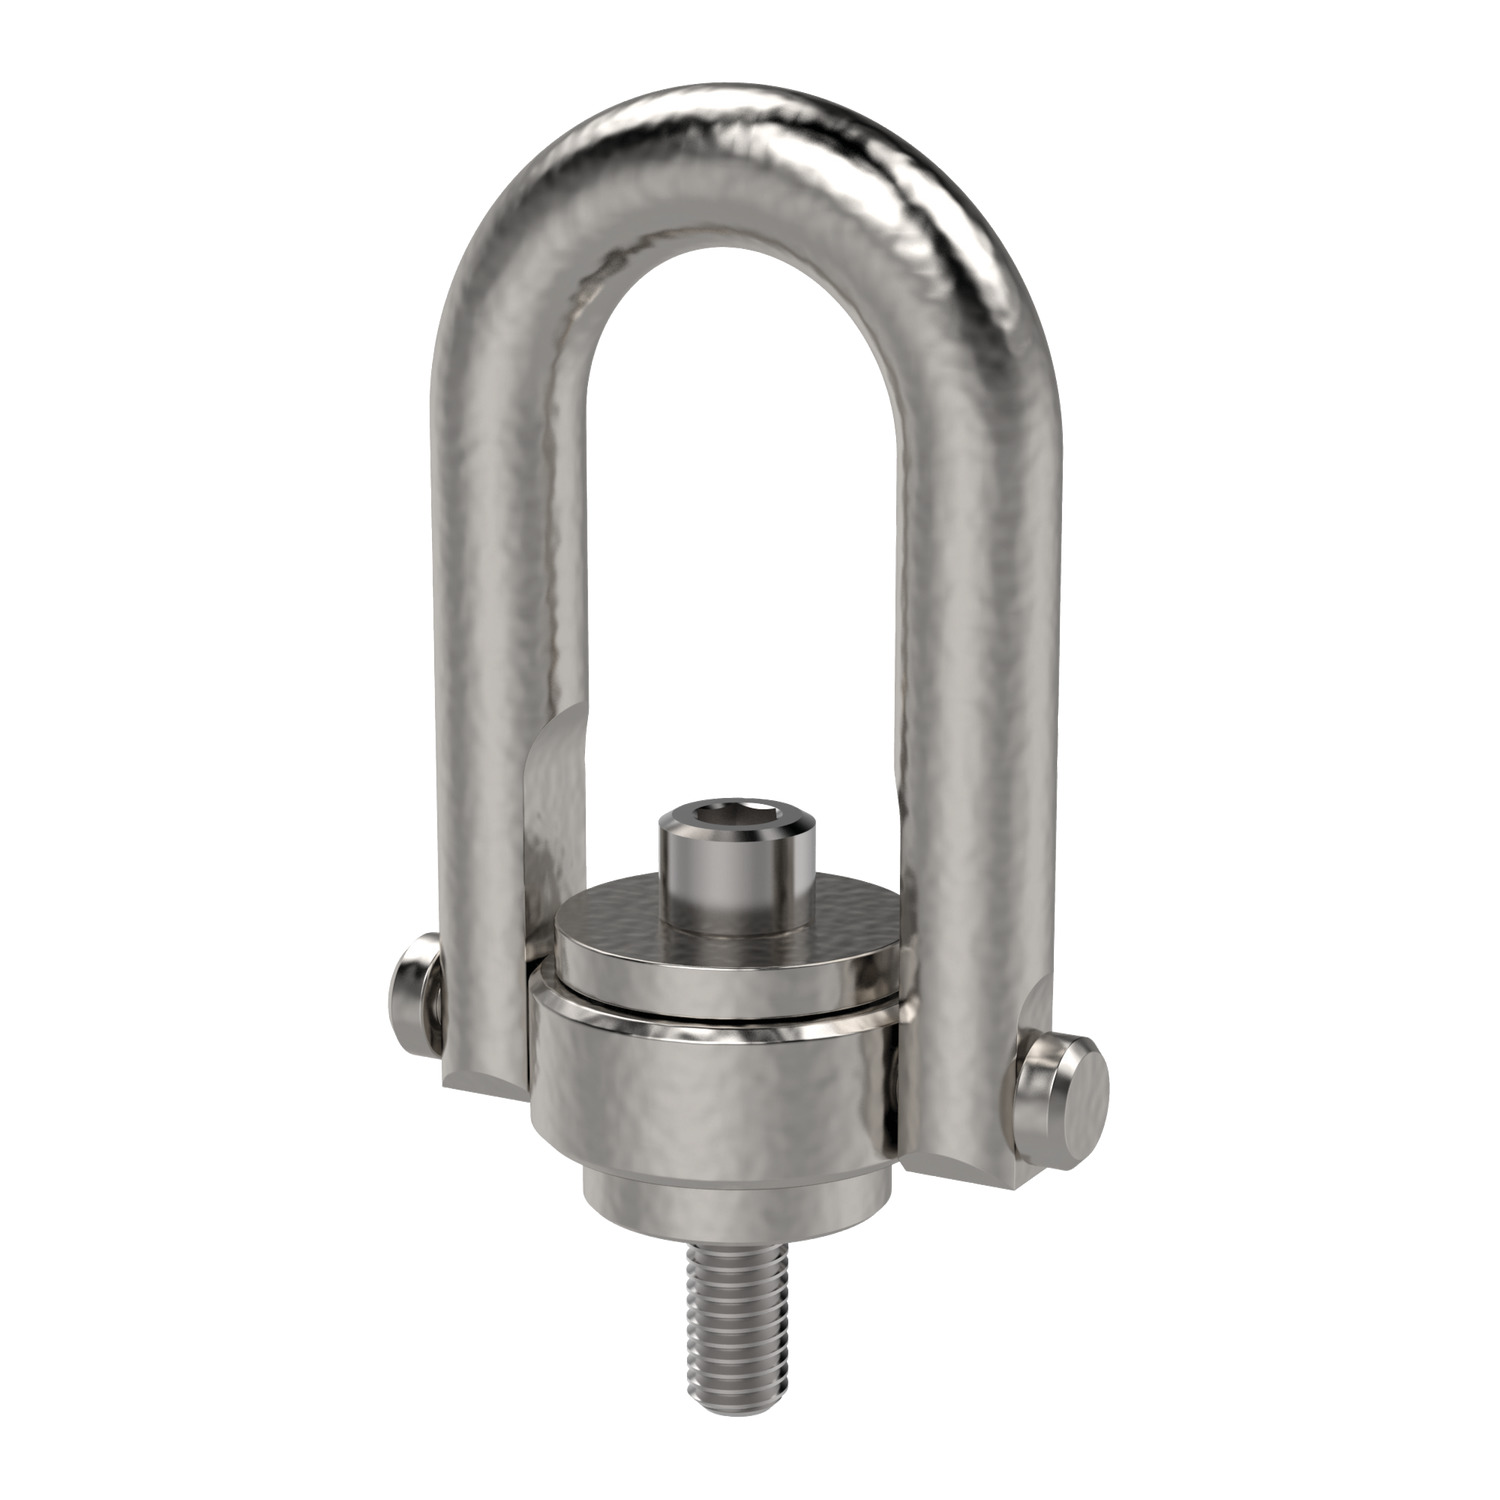 Product 63582, Lifting Points - Double Swivel - Male long bar - UNC thread - stainless steel / 